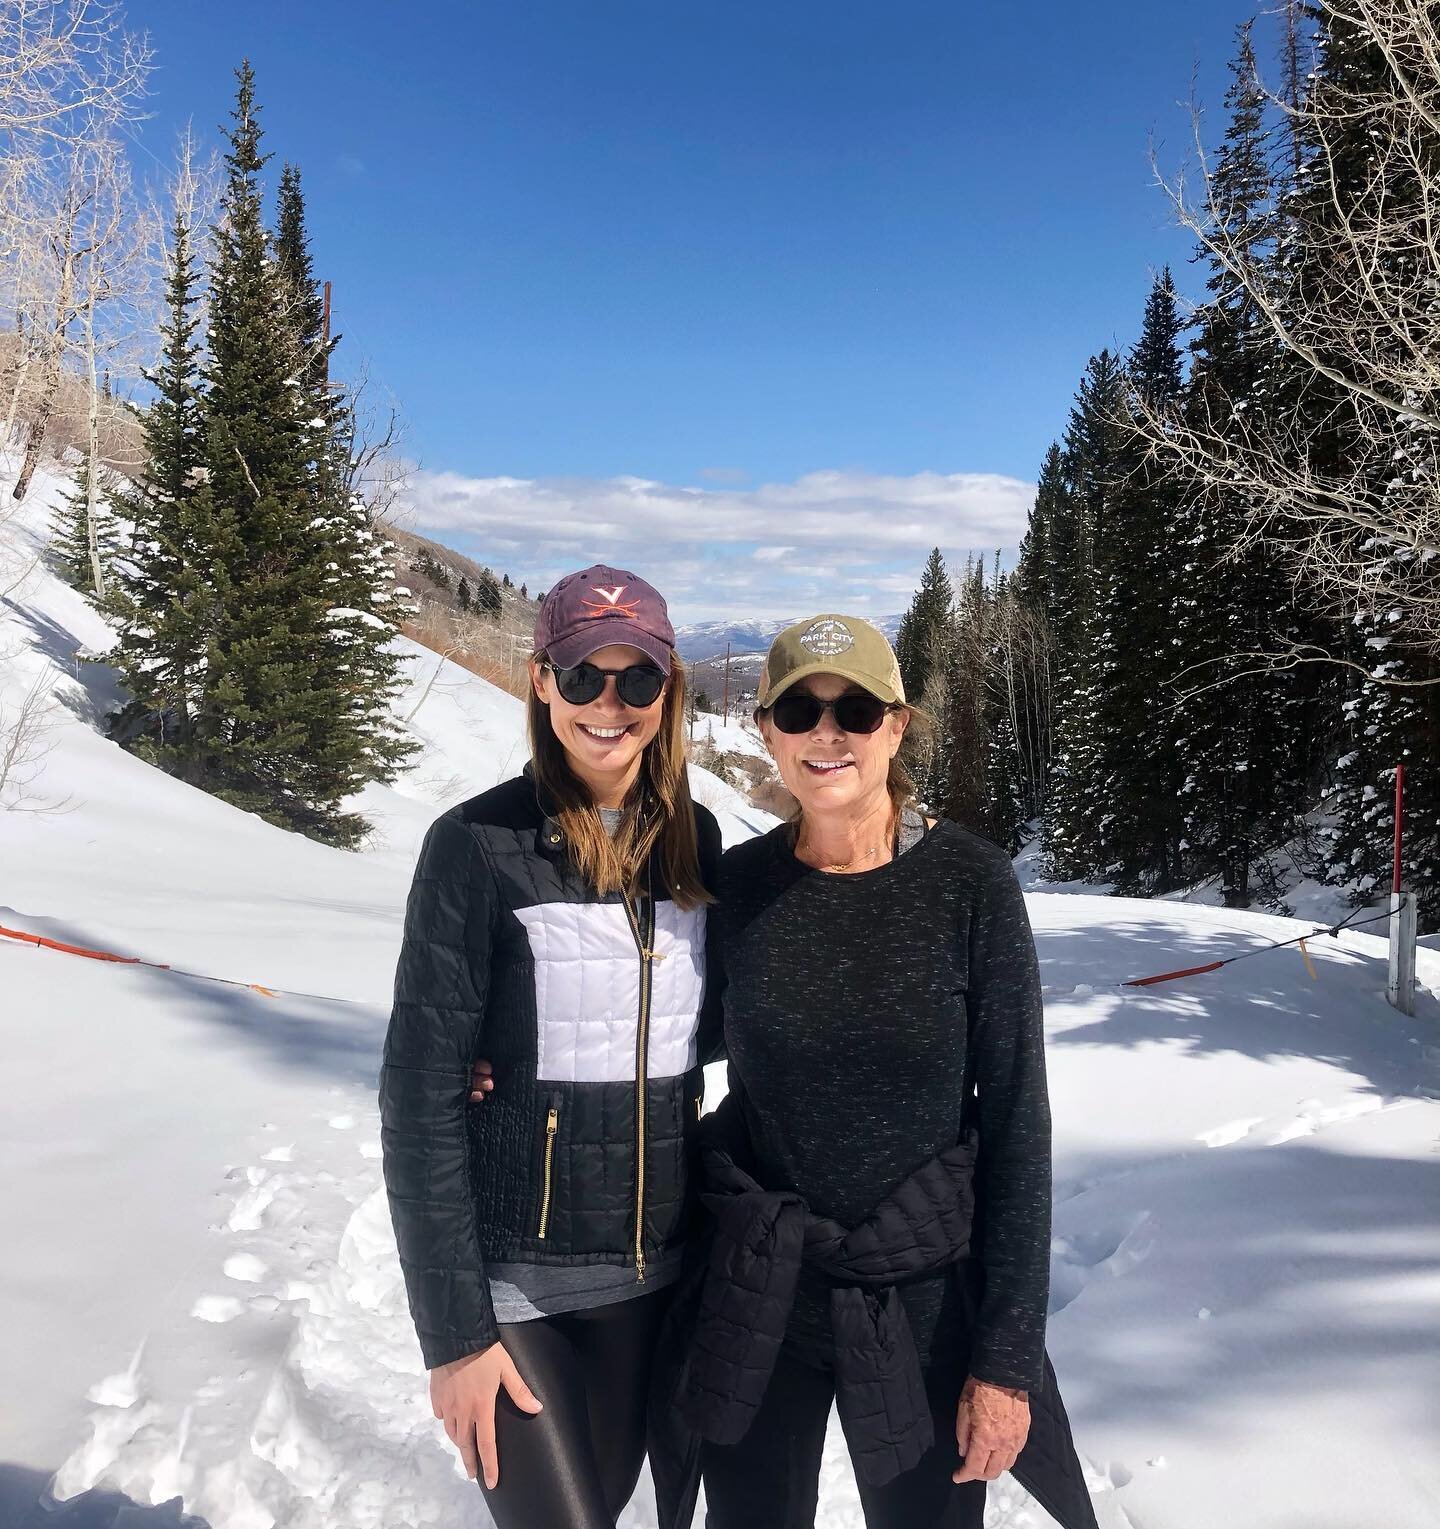 Just two Florida girls who can&rsquo;t get enough of winter. ❄️🌲⛷